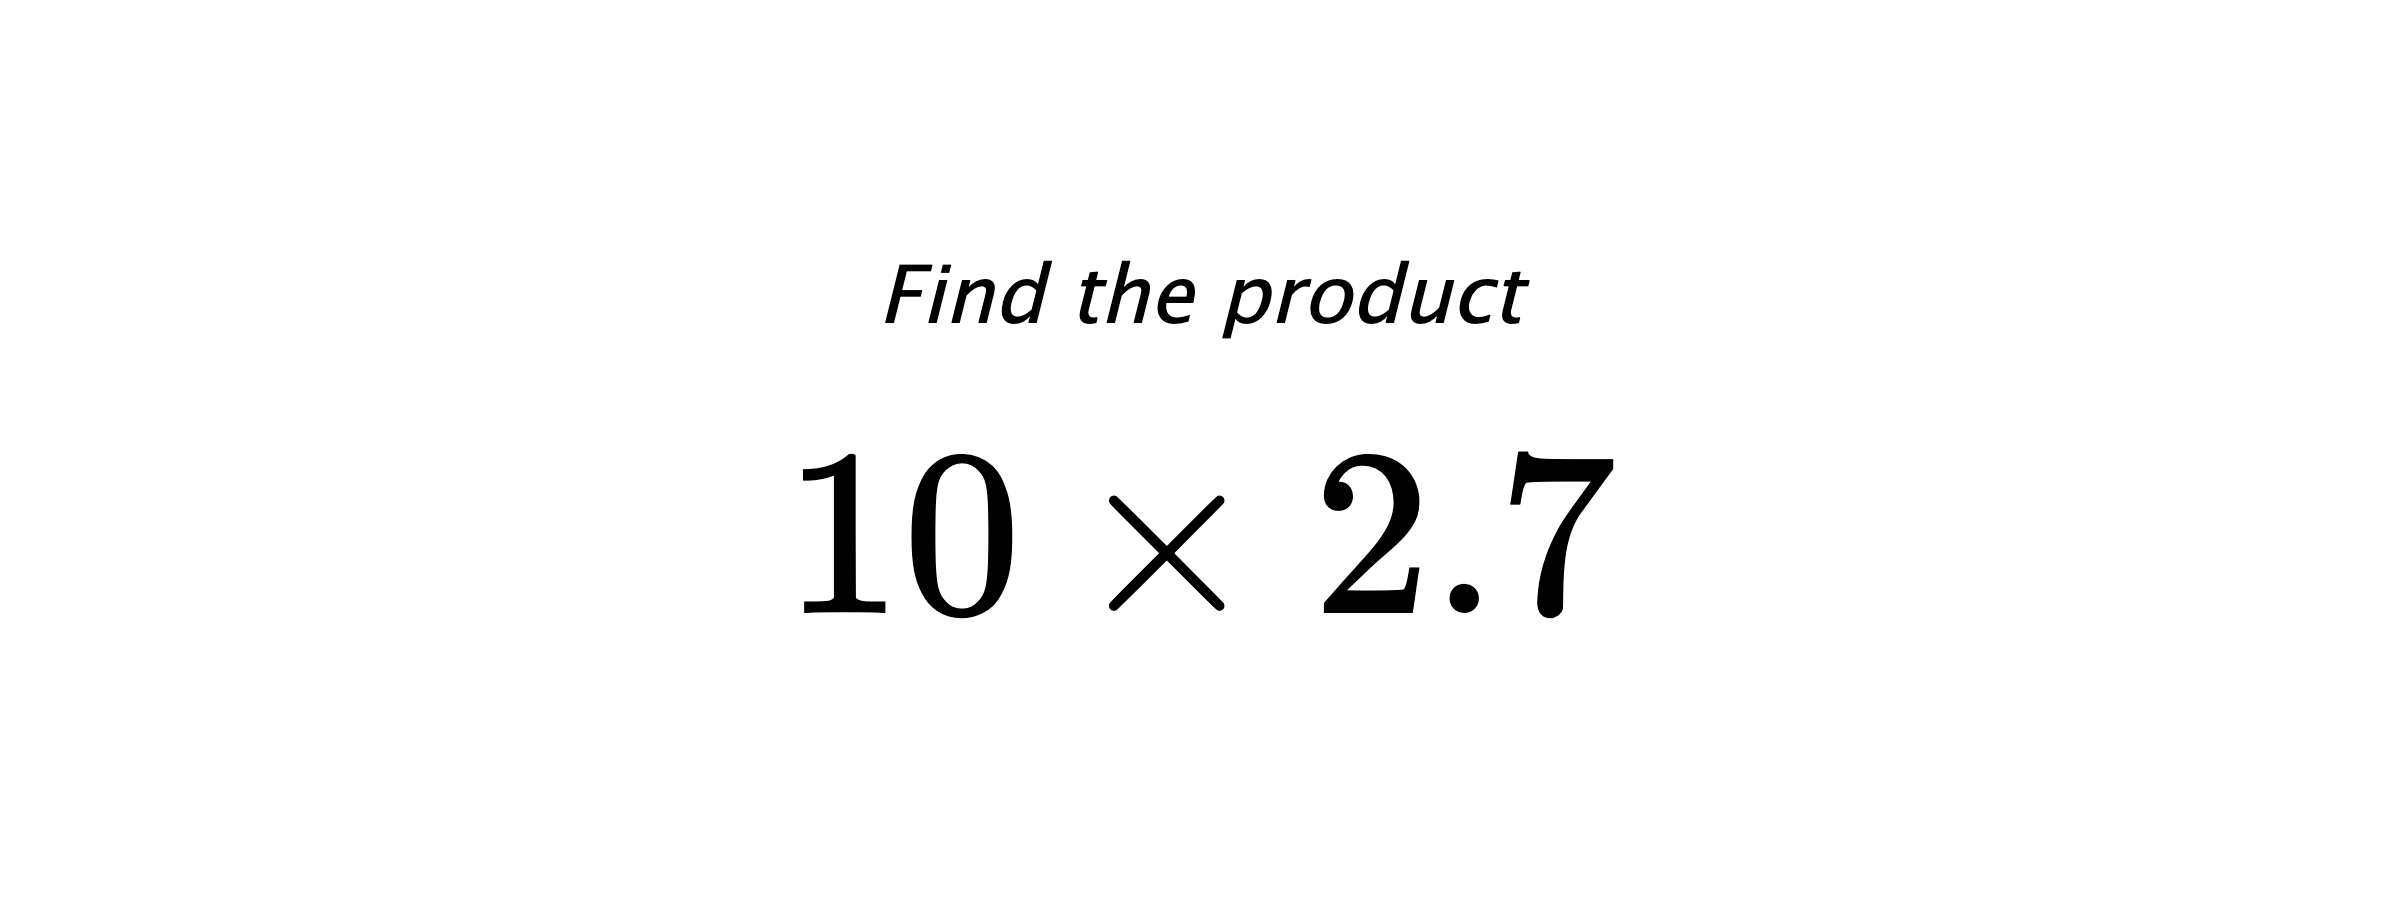 Find the product $ 10 \times 2.7 $